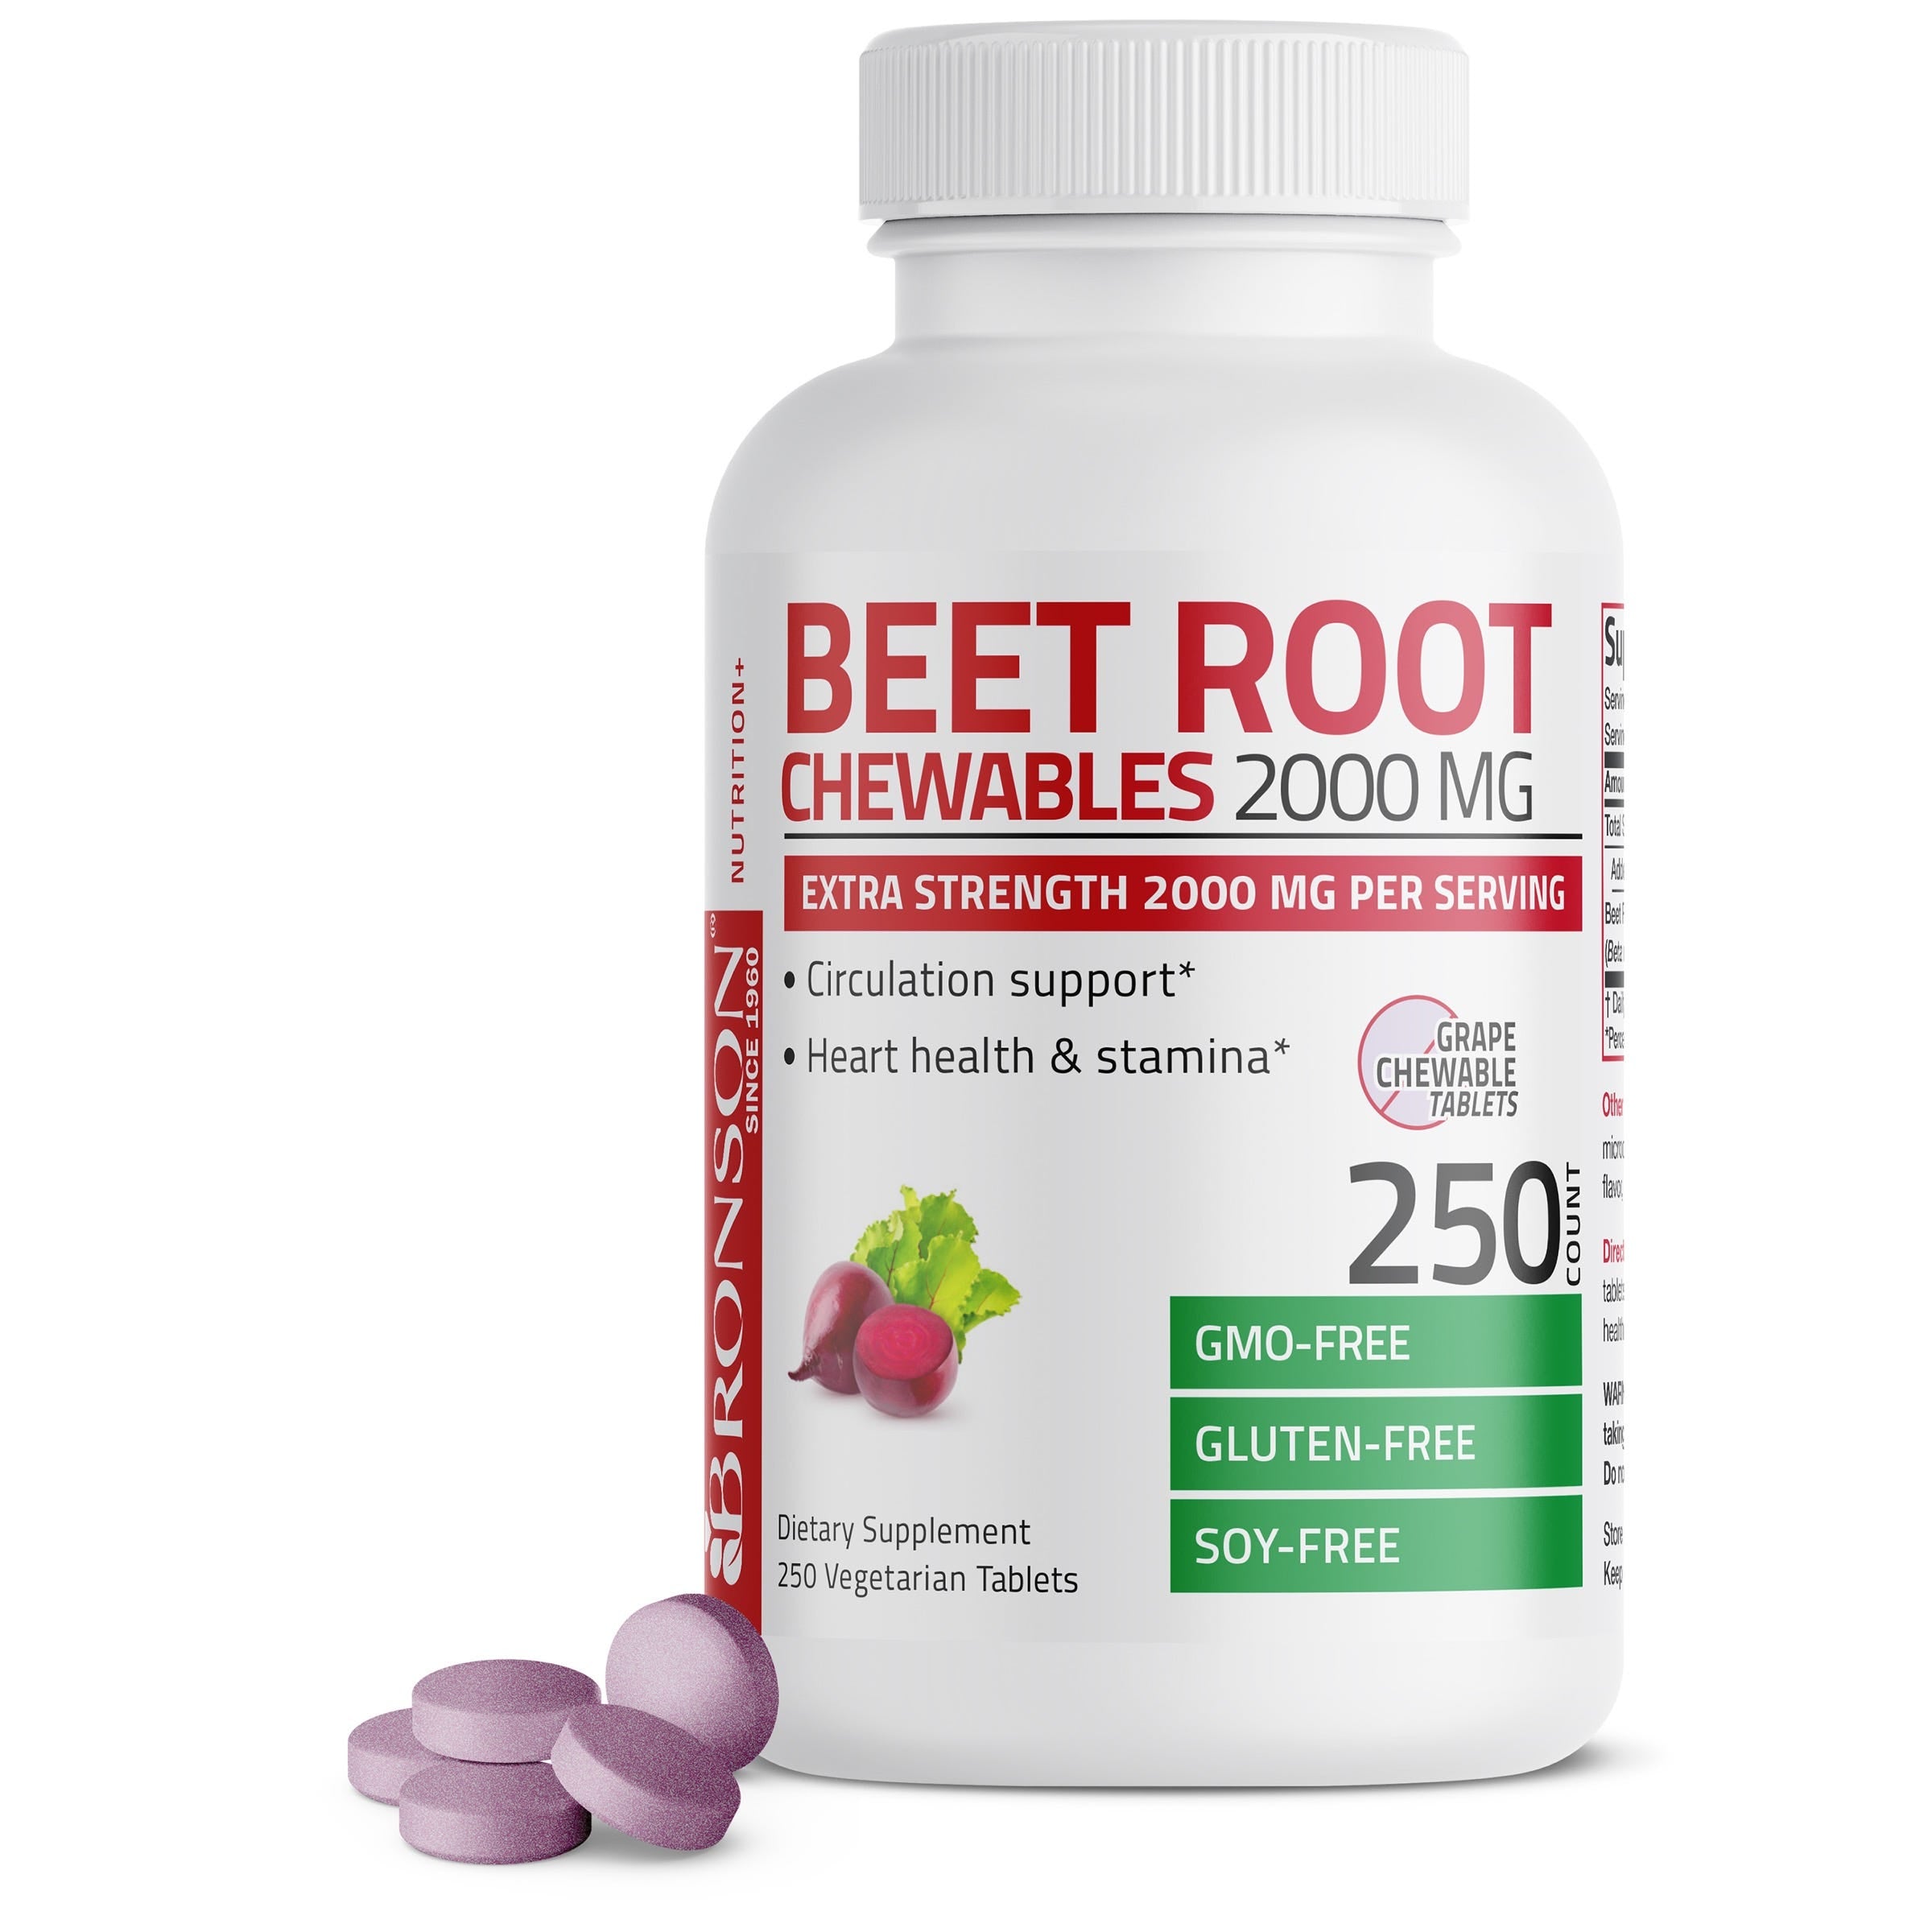 Beet Root Chewables 2000 MG, 250 Grape Flavored Tablets